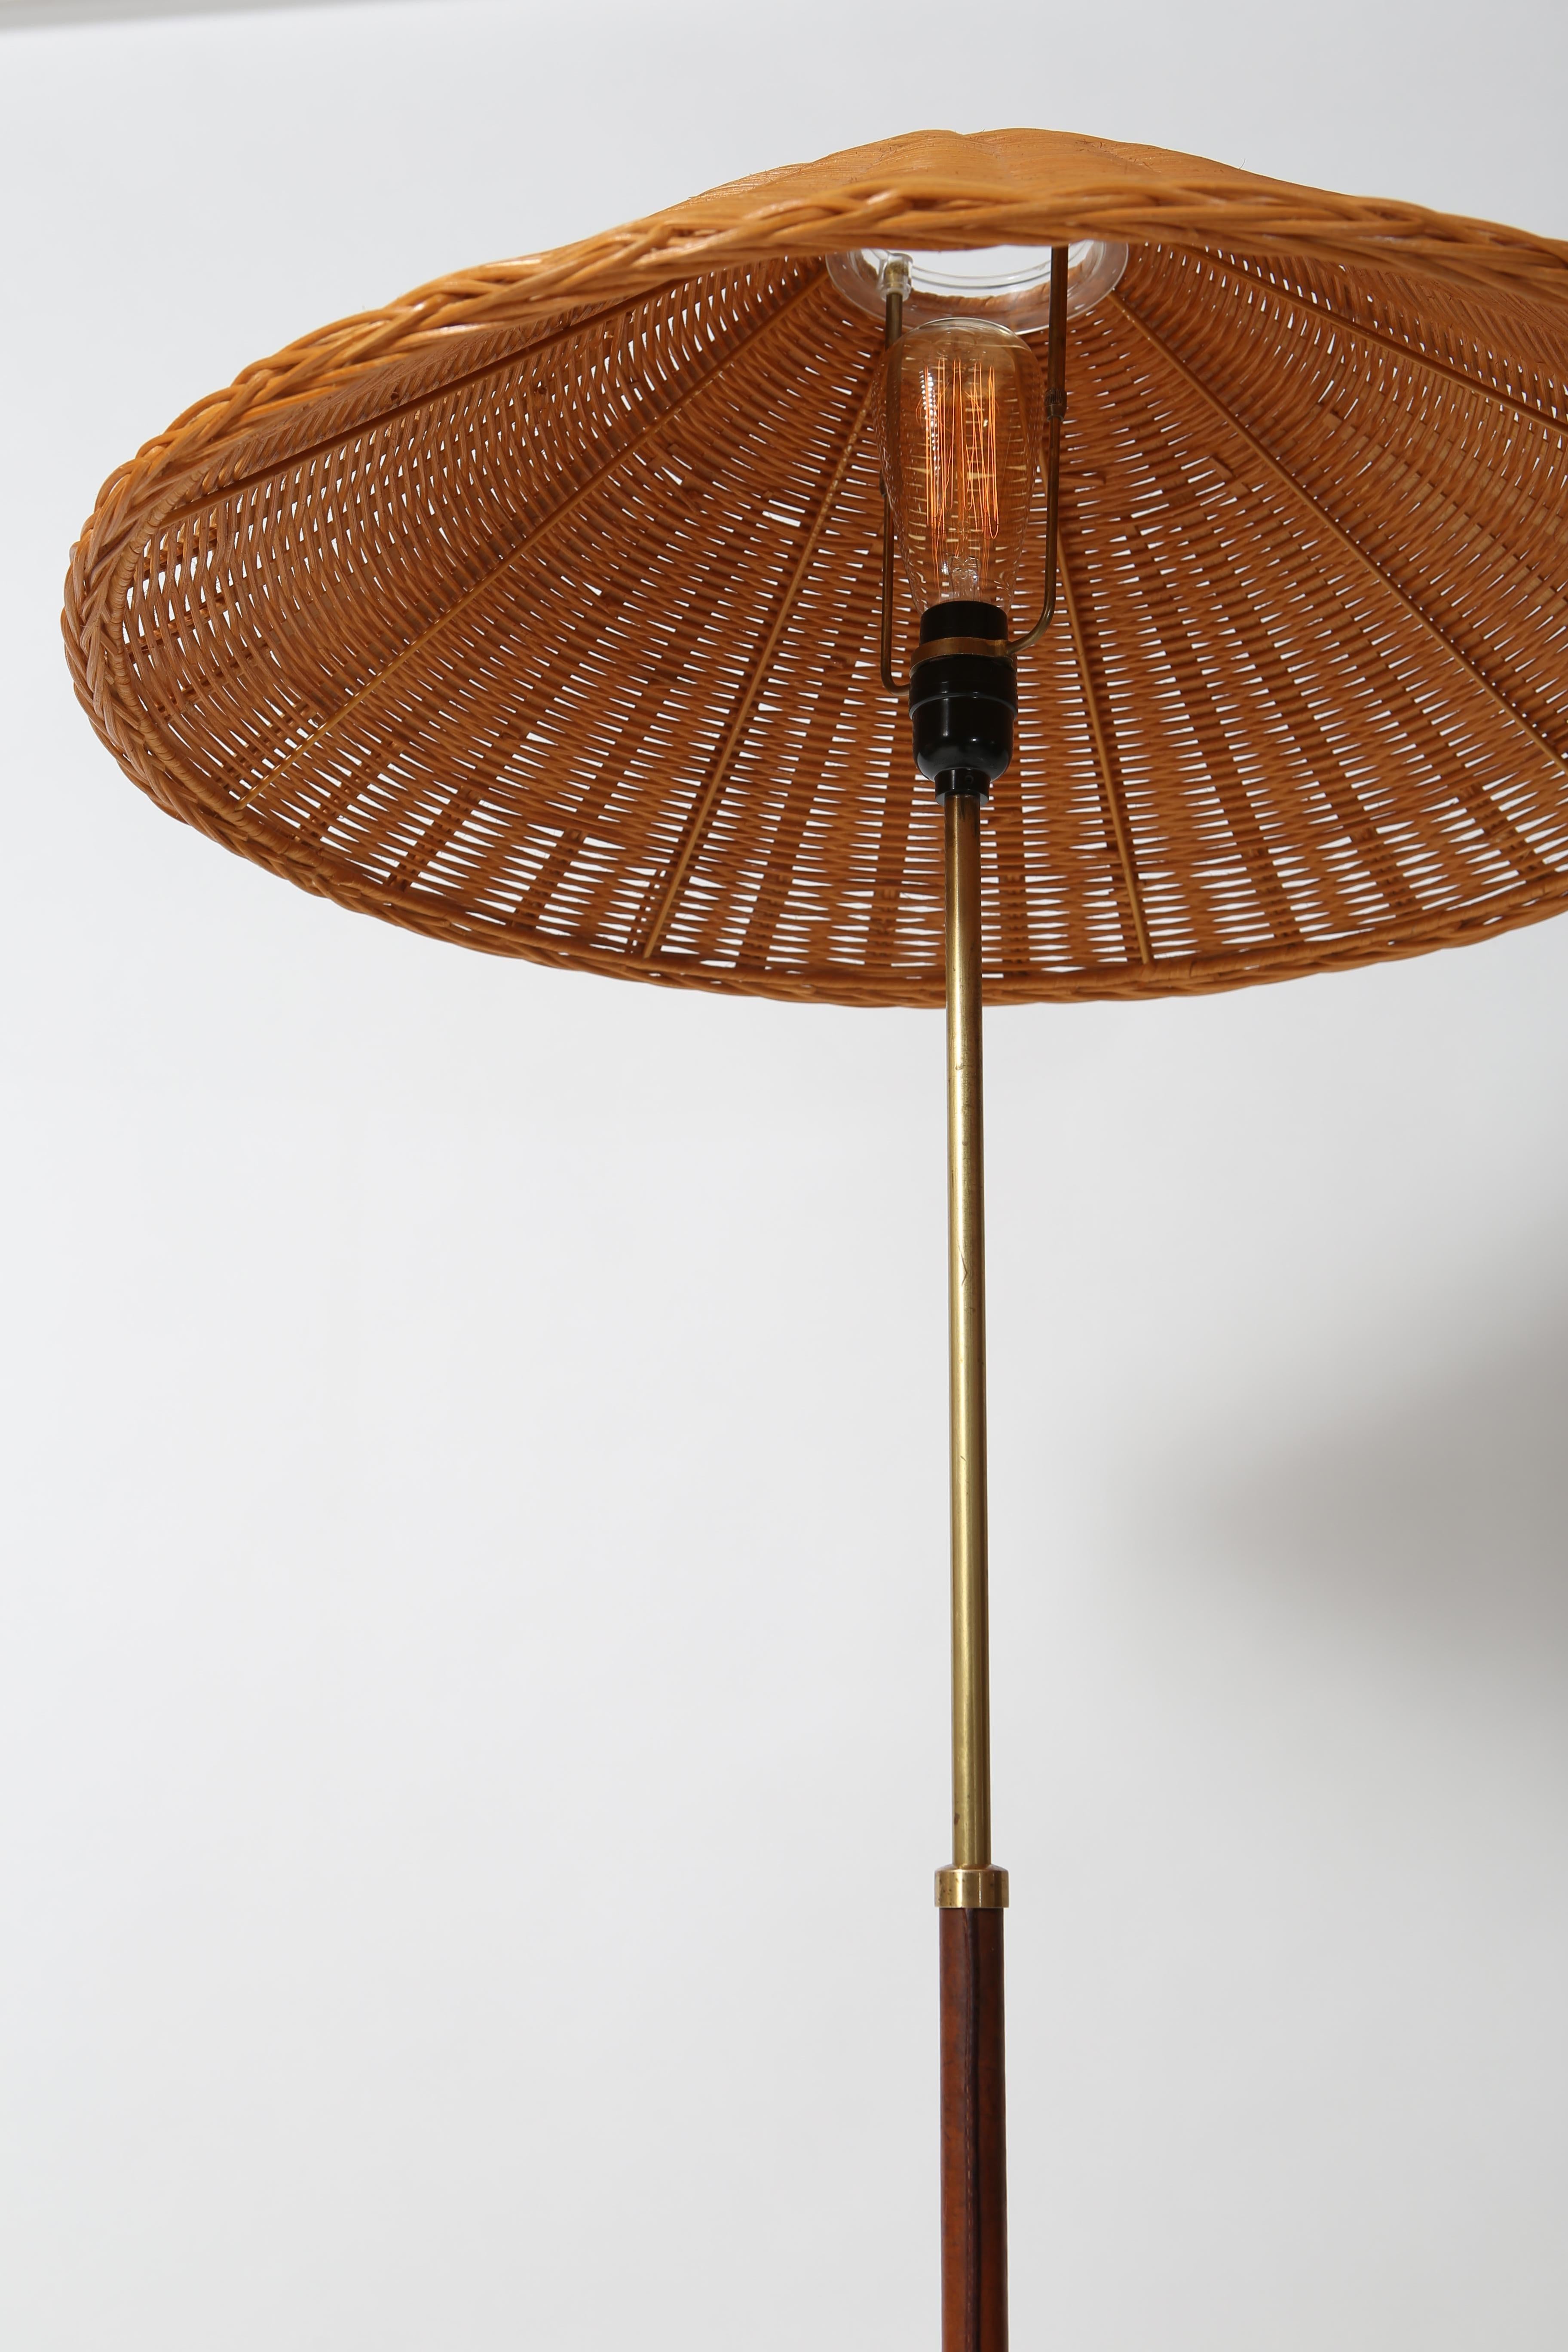 Telescopic brass floor lamp, wrapped in patinated leather with wicker shade. 49” to 72” height adjustable. Wonderful age-appropriate patina to brass and leather; shade in immaculate condition. Elegant and modern.
Imported from Scandinavia. 1960s.